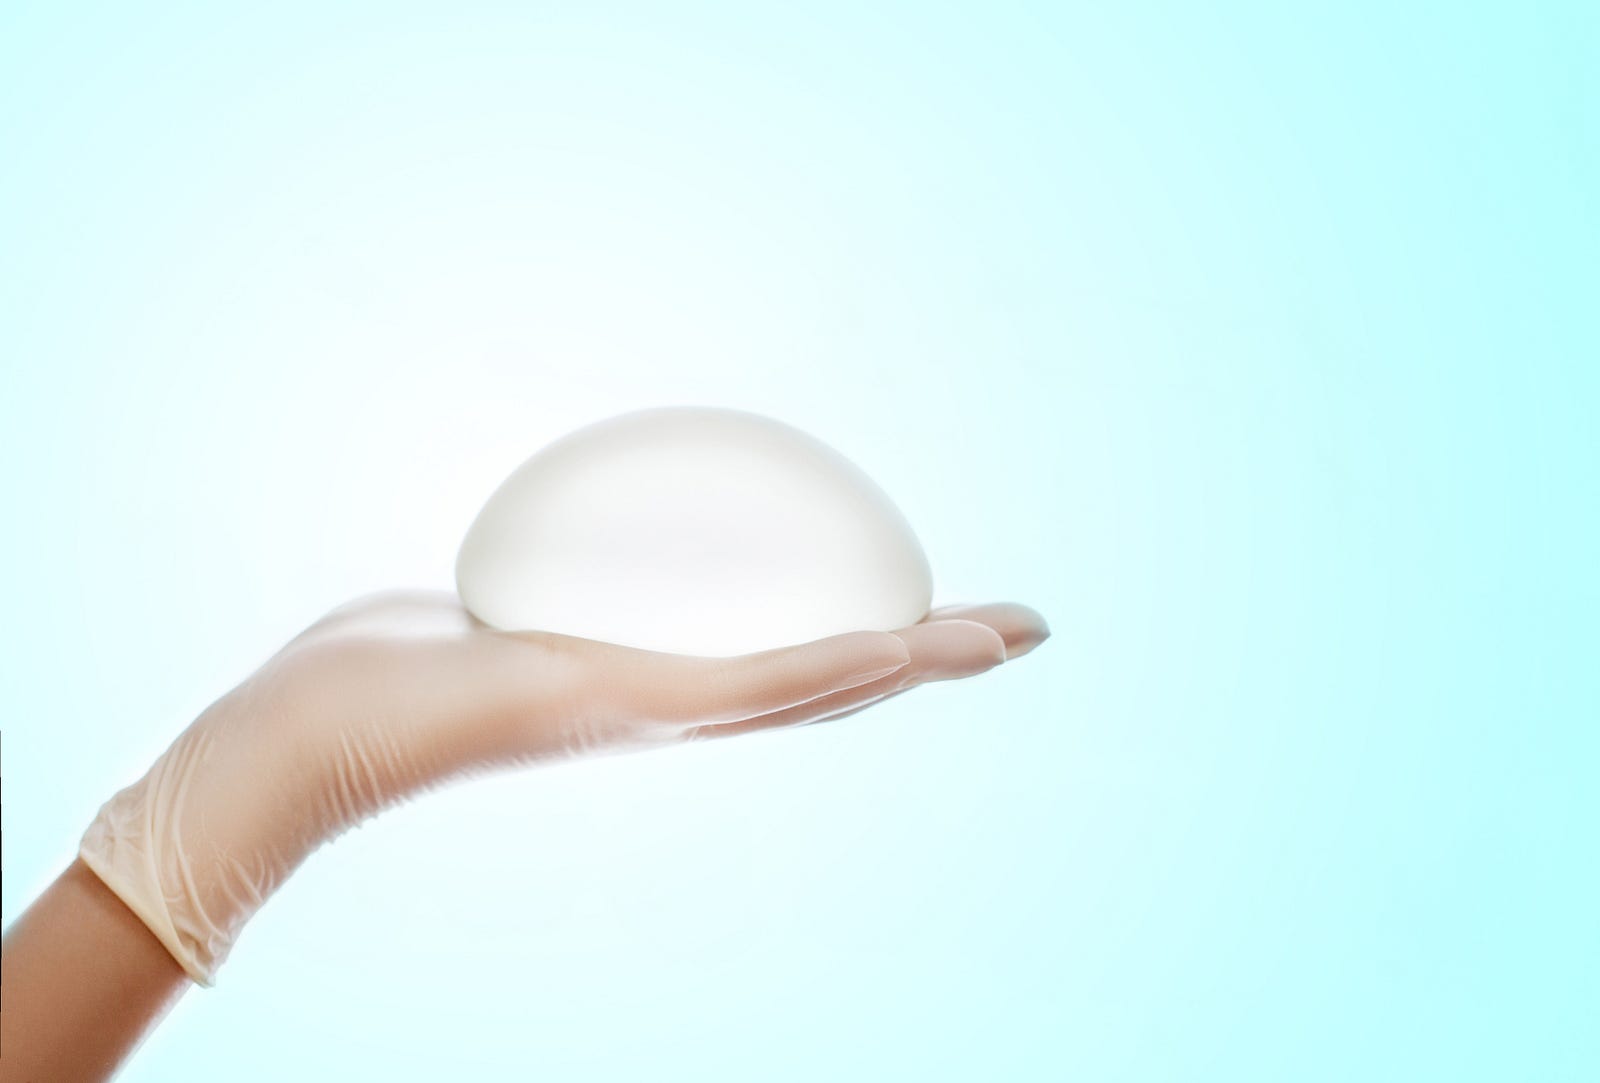 Could 3-D Printing Solve the Breast Implant Illness Crisis?